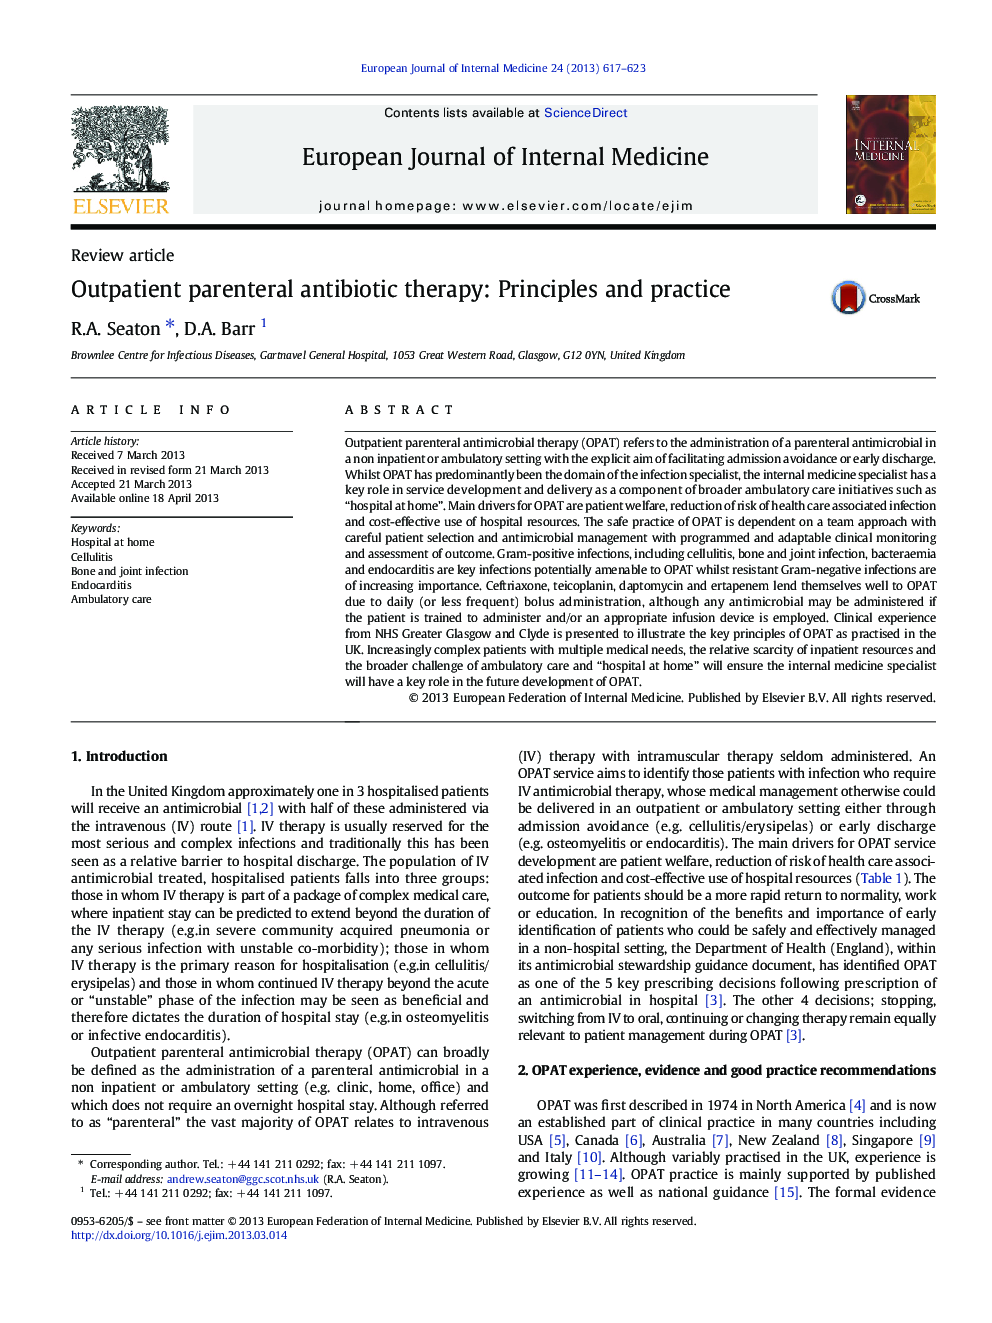 Outpatient parenteral antibiotic therapy: Principles and practice